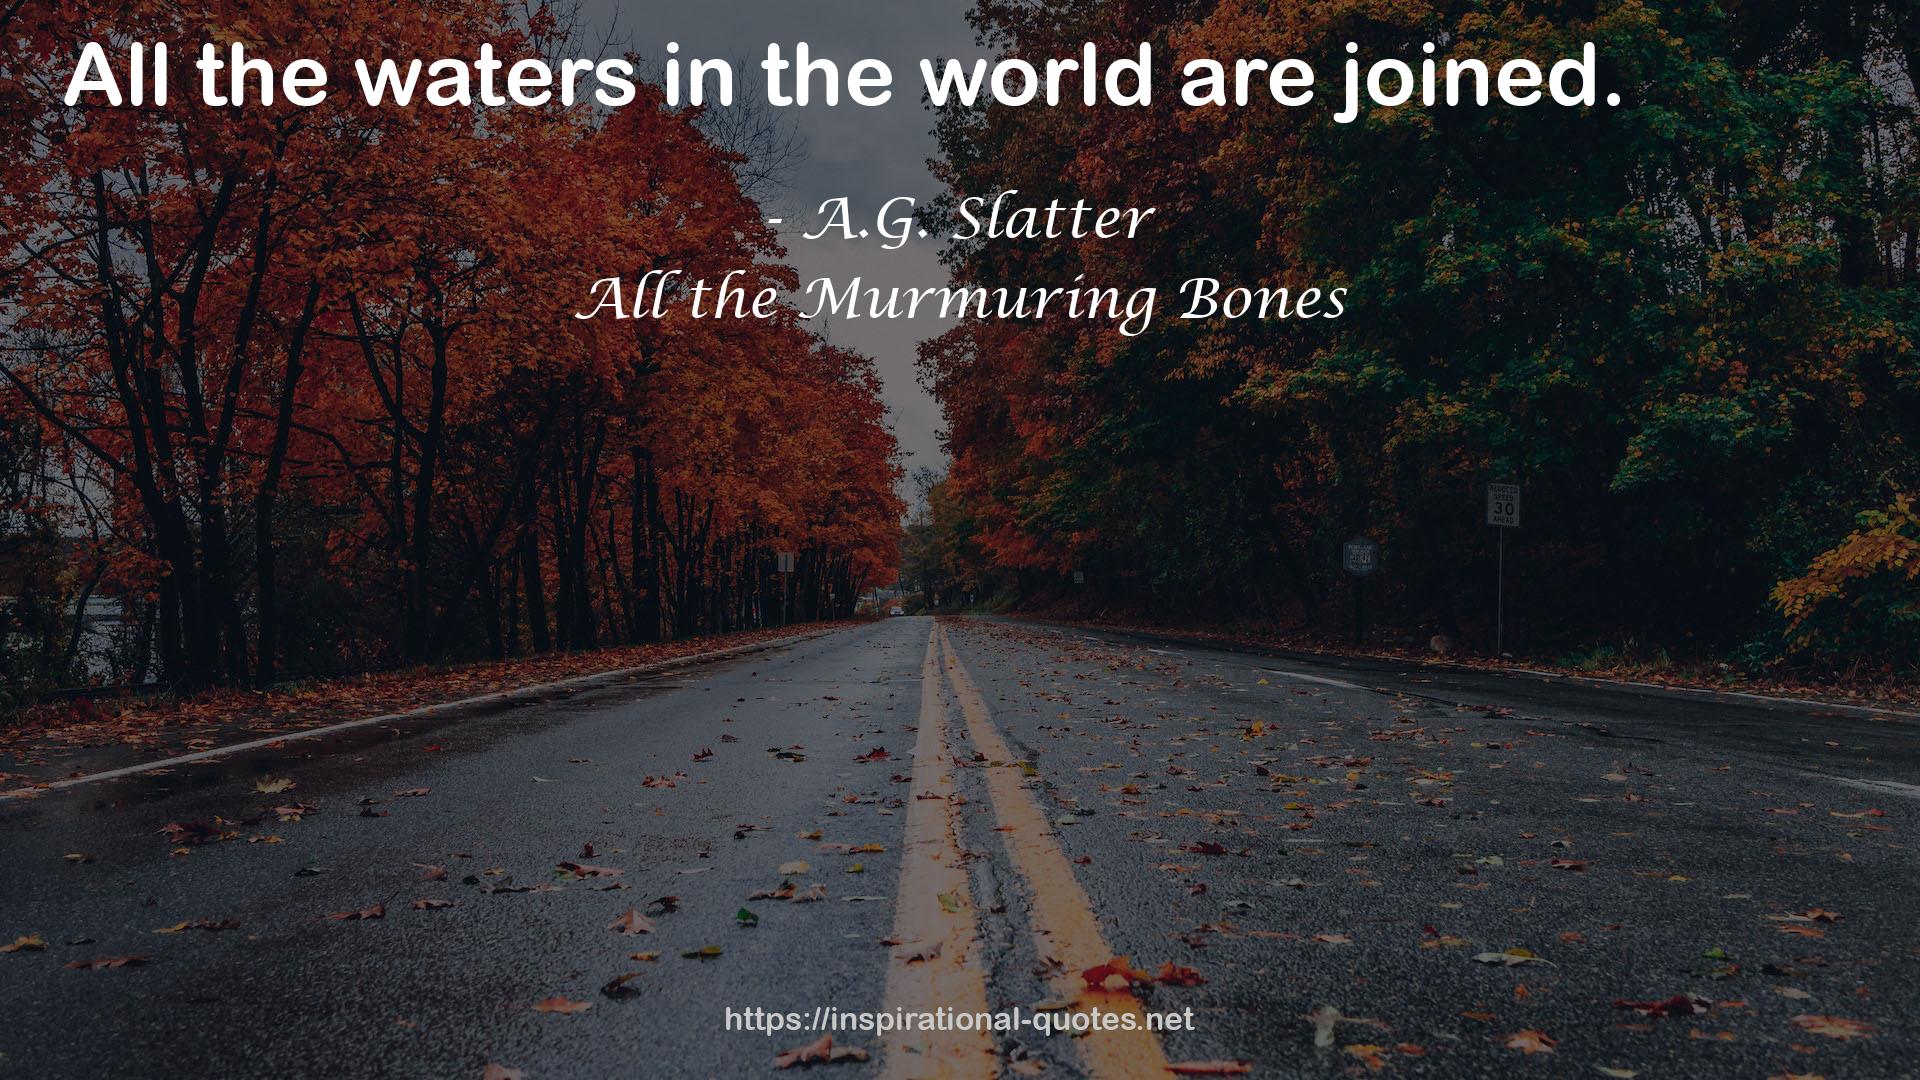 A.G. Slatter QUOTES